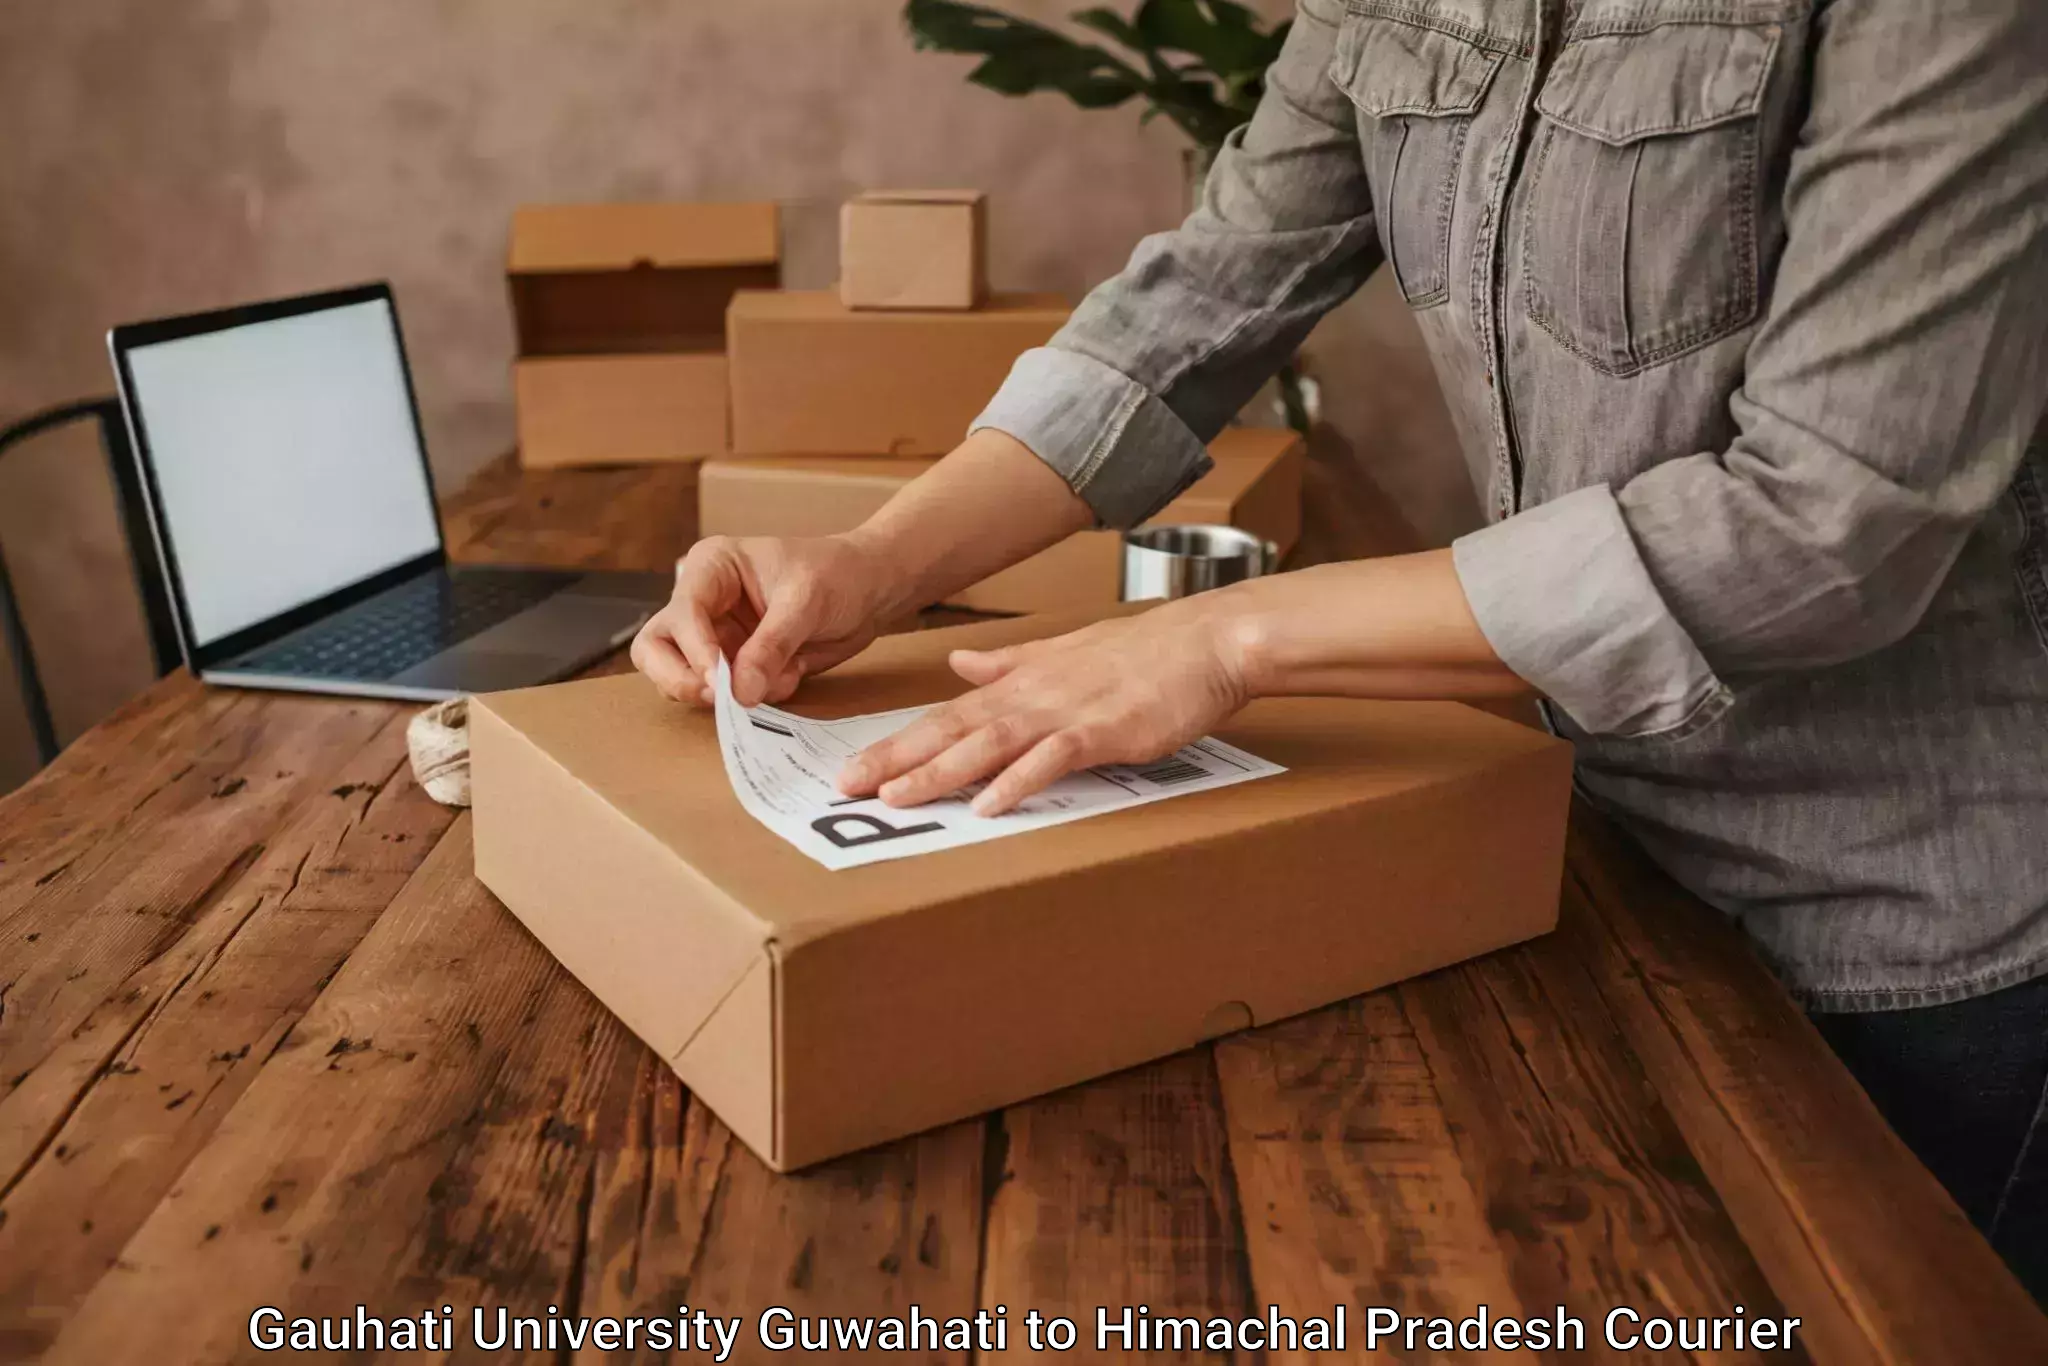 Nationwide parcel services Gauhati University Guwahati to YS Parmar University of Horticulture and Forestry Solan